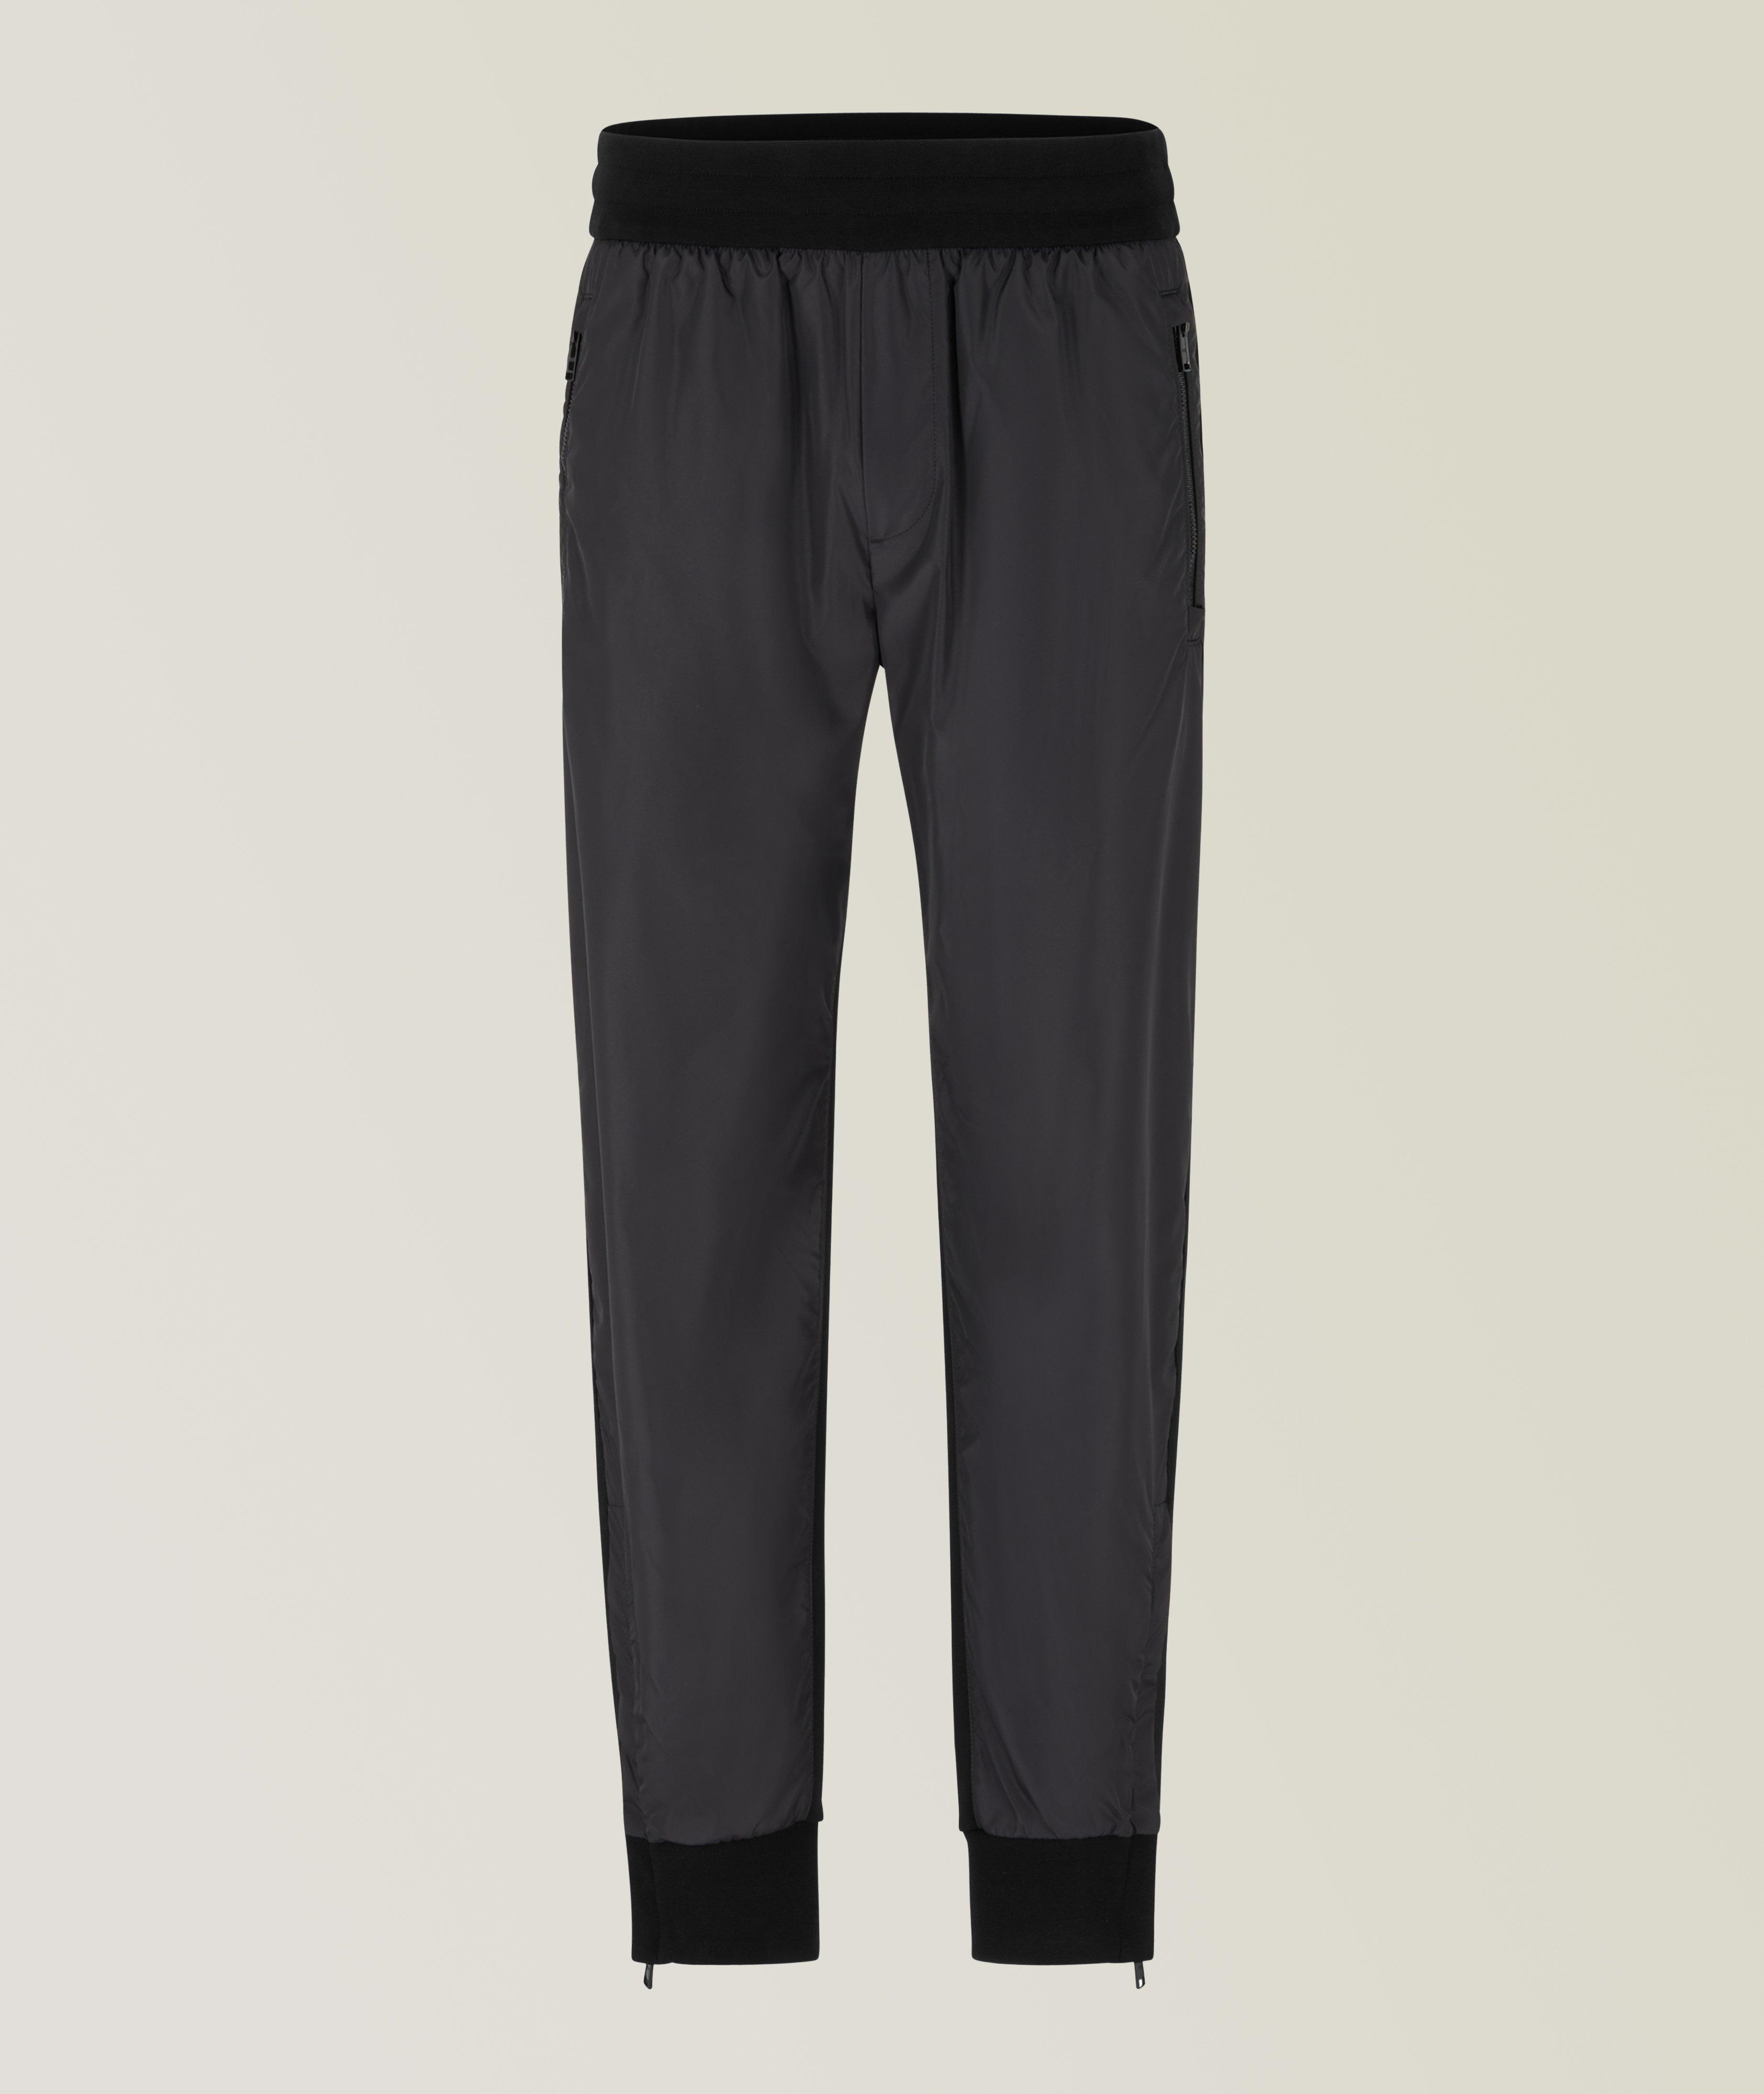 Two-Tone Technical-Stretch Trousers image 0